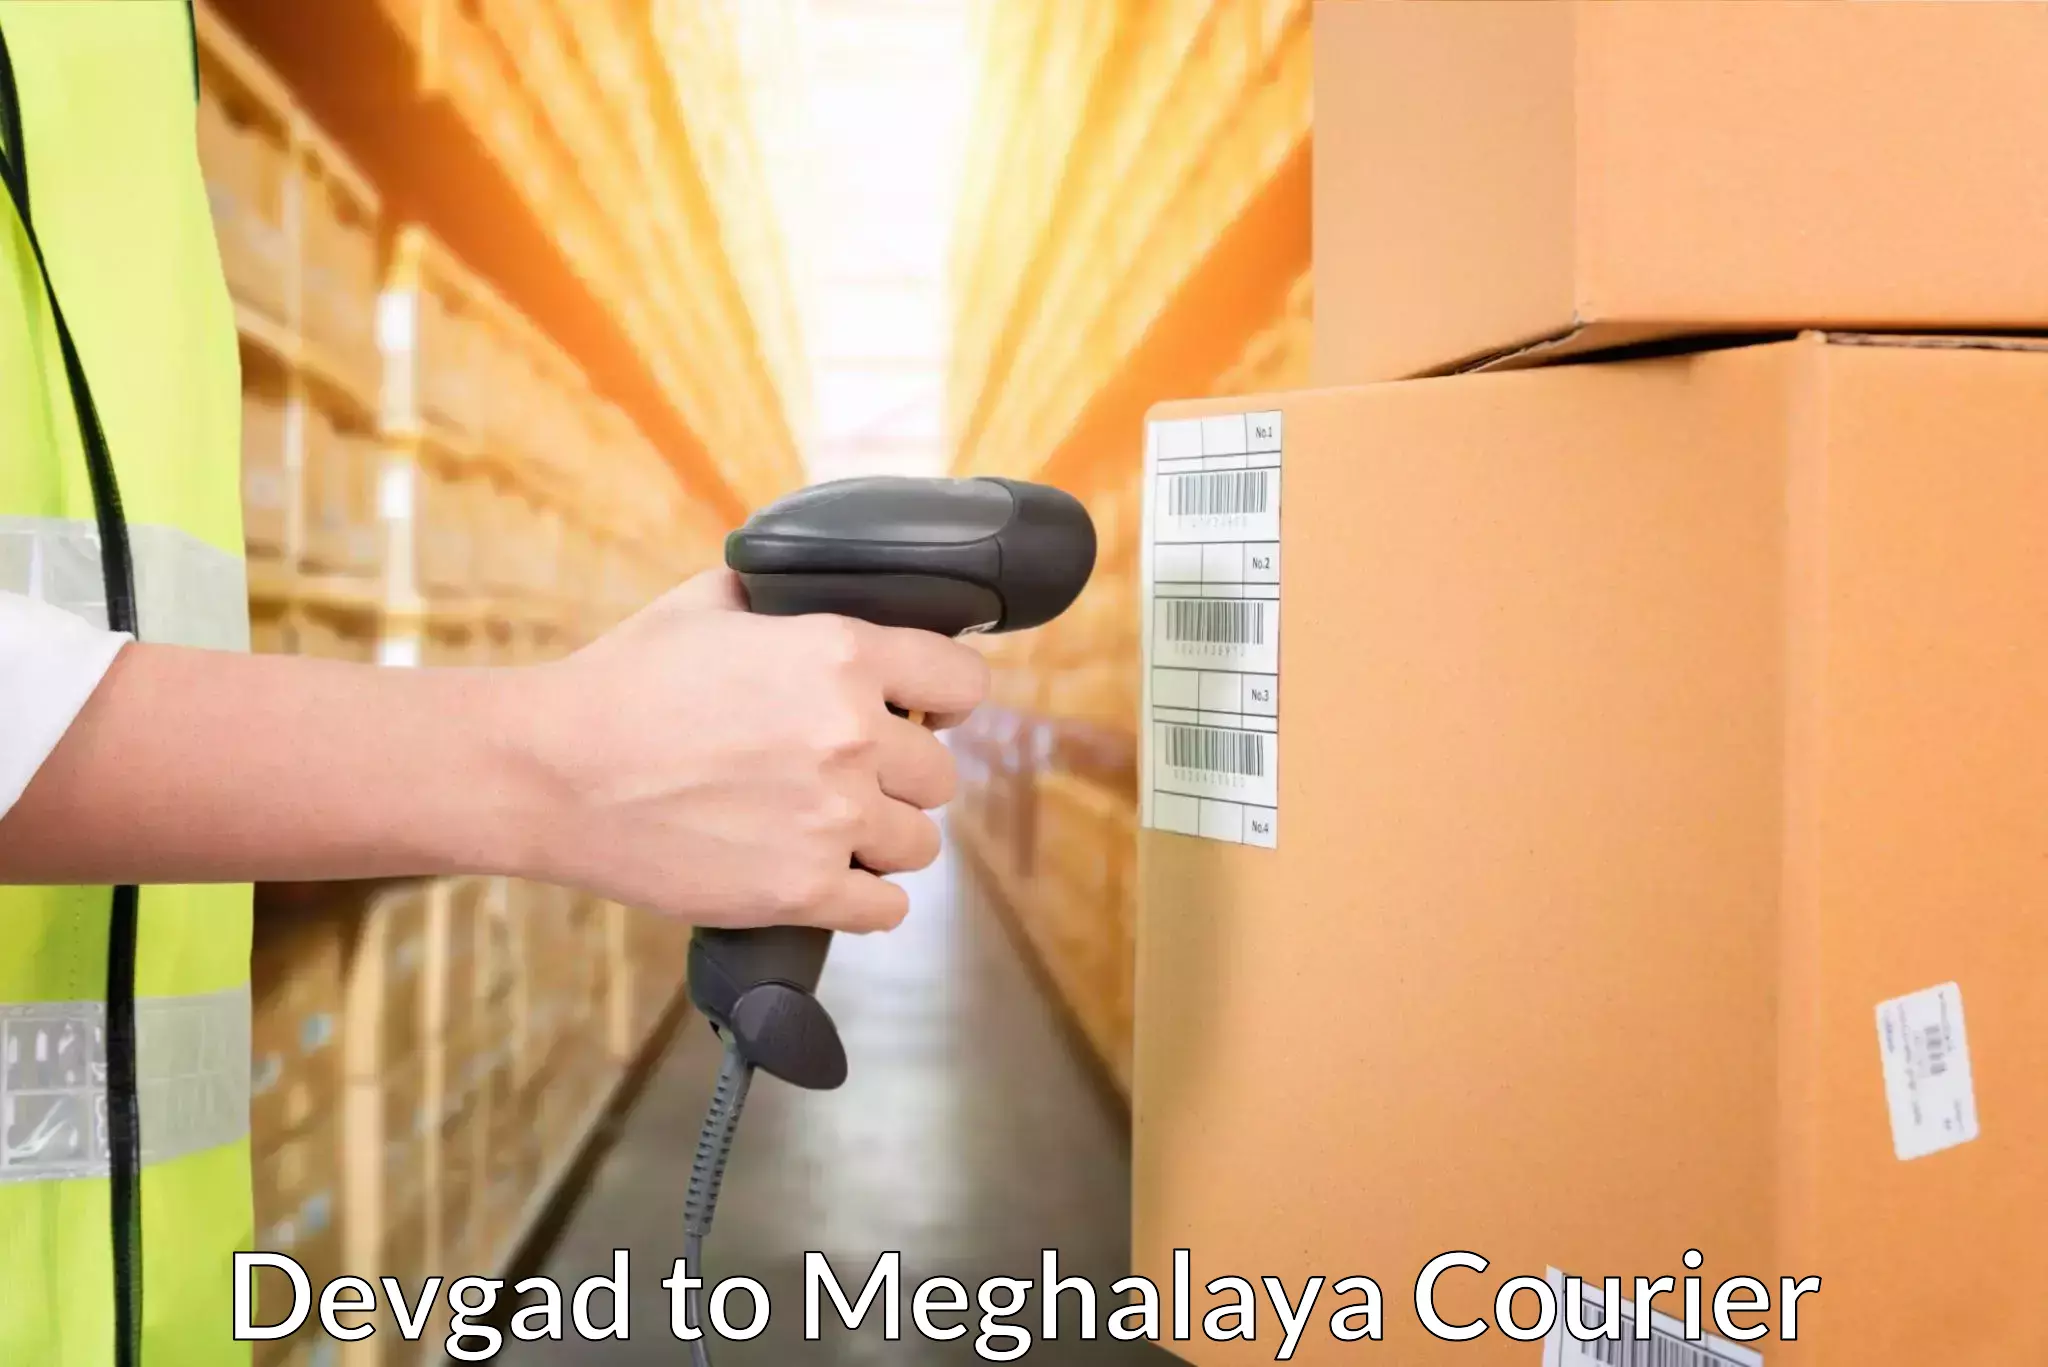 Global shipping solutions Devgad to Umsaw